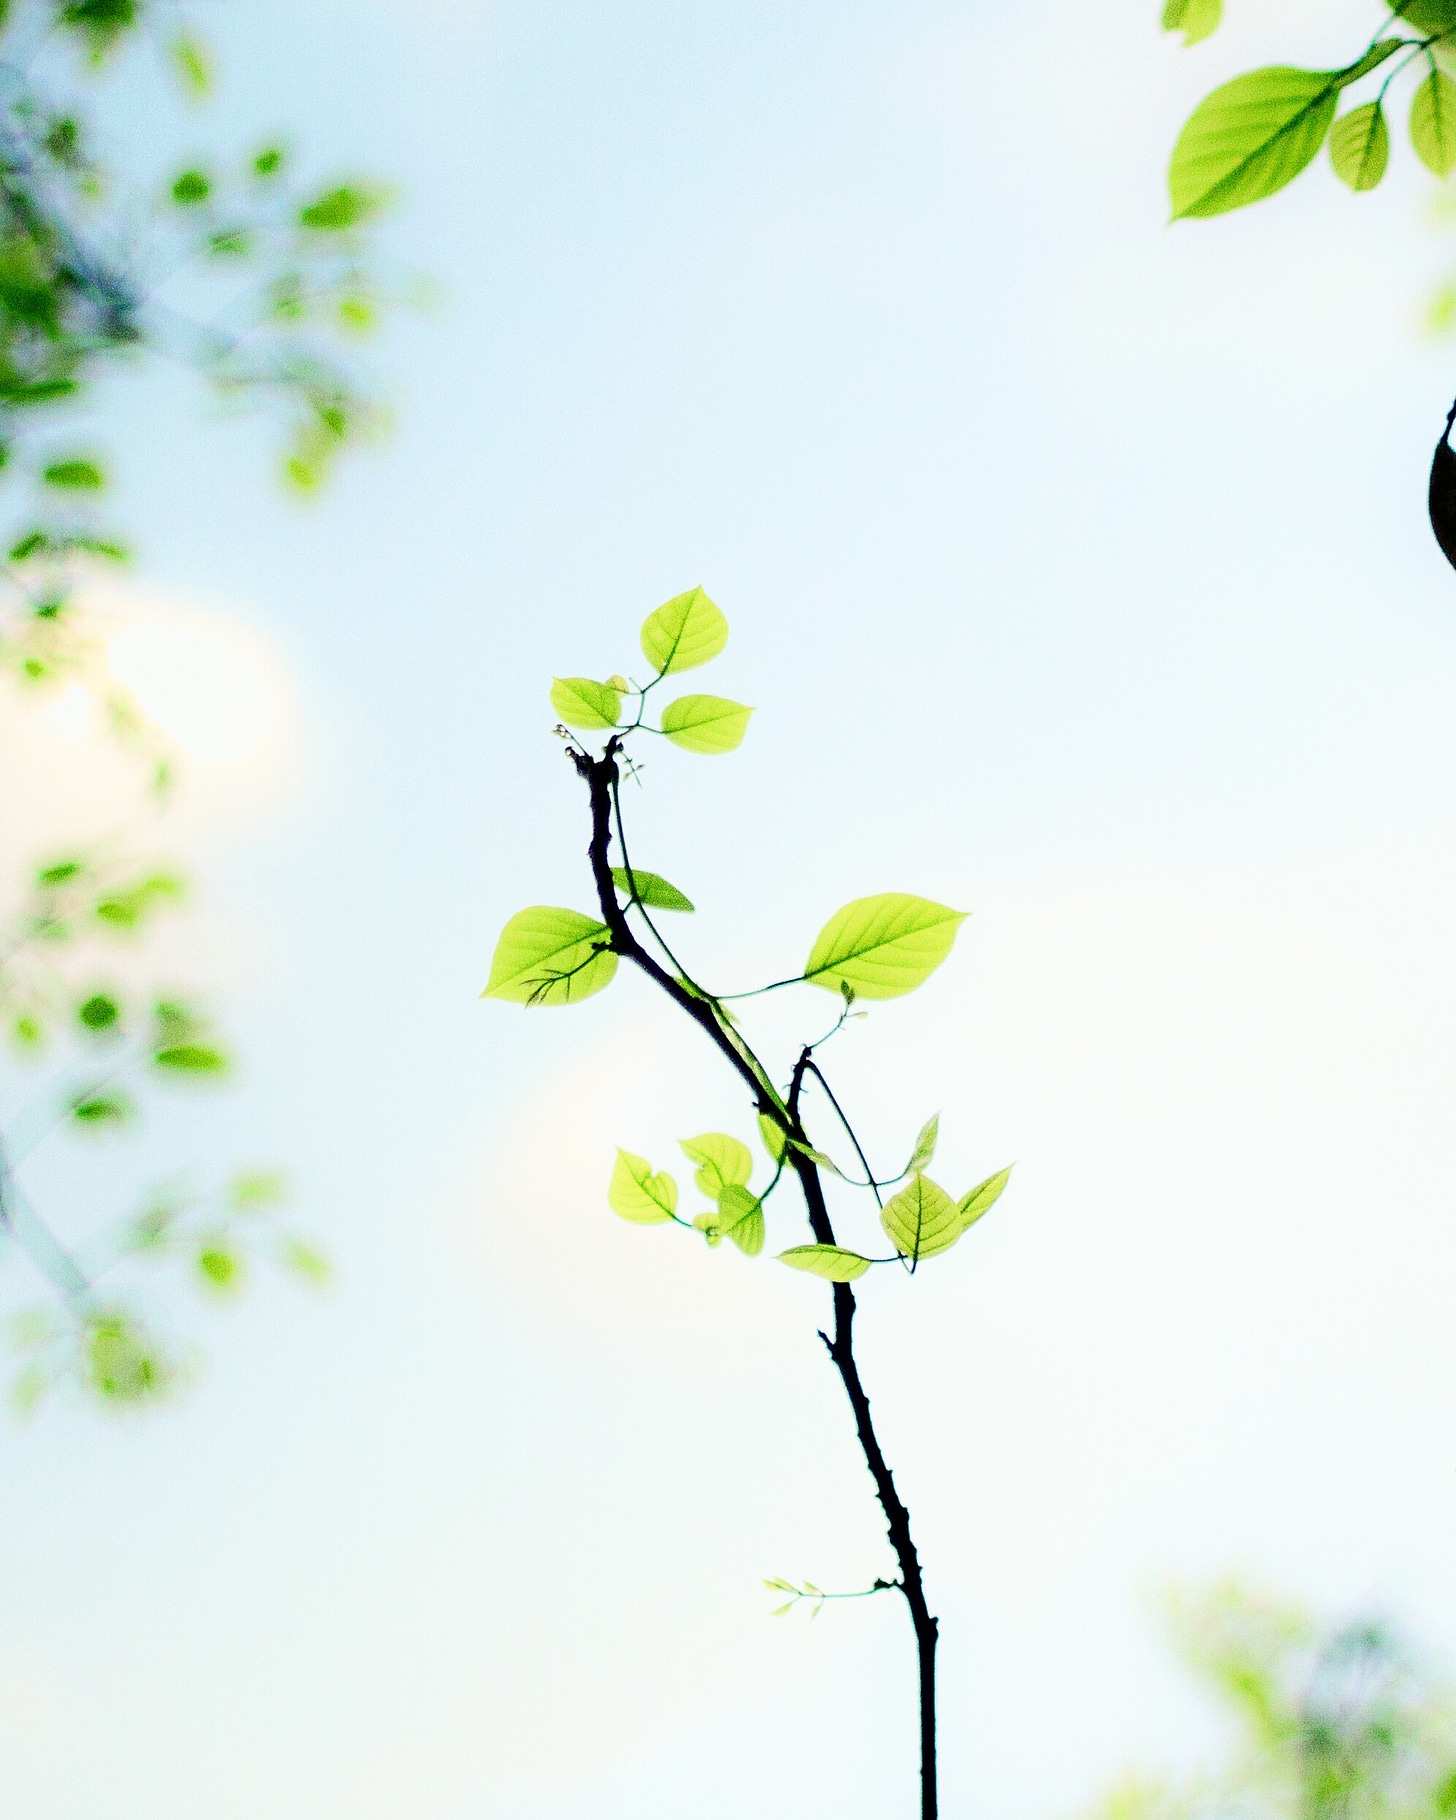 picture of a twig with green leaves against a blue sky background. The twig is in focus while several tree branches in the background have been heavily blurred. the photo has been heavily brightened so that the green leaves and light blue are all very bright.